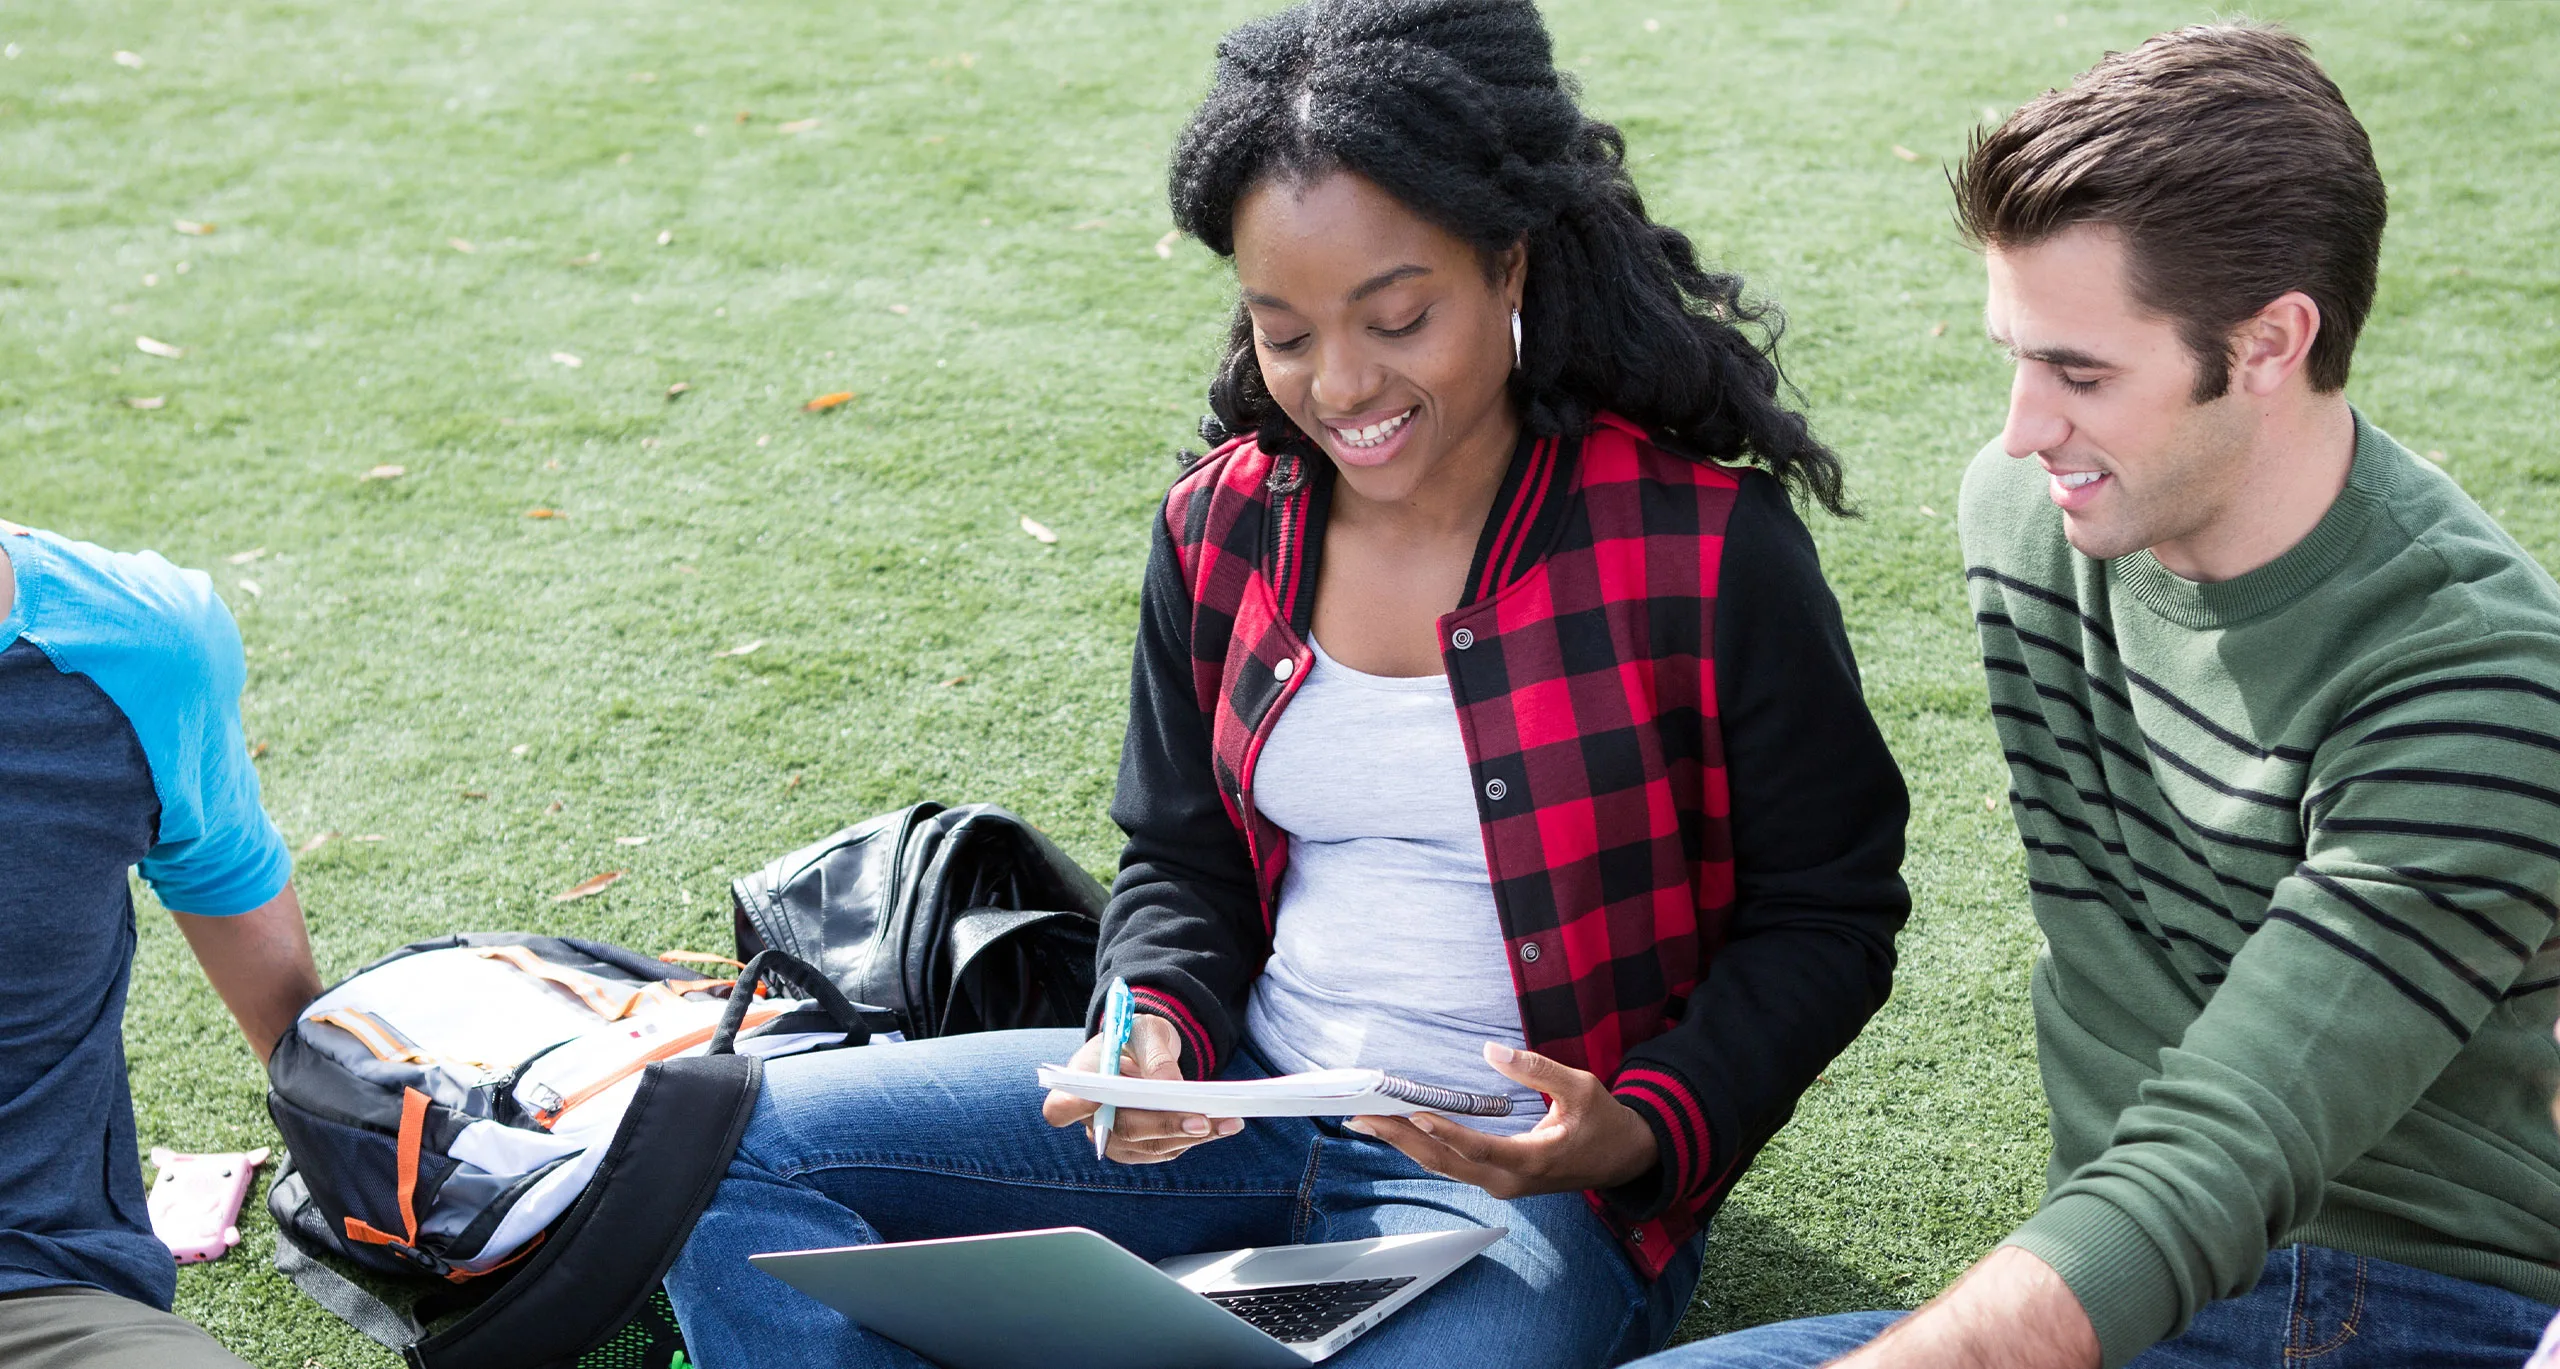 Students sitting on a patch of grass with a notebook and a laptop computer